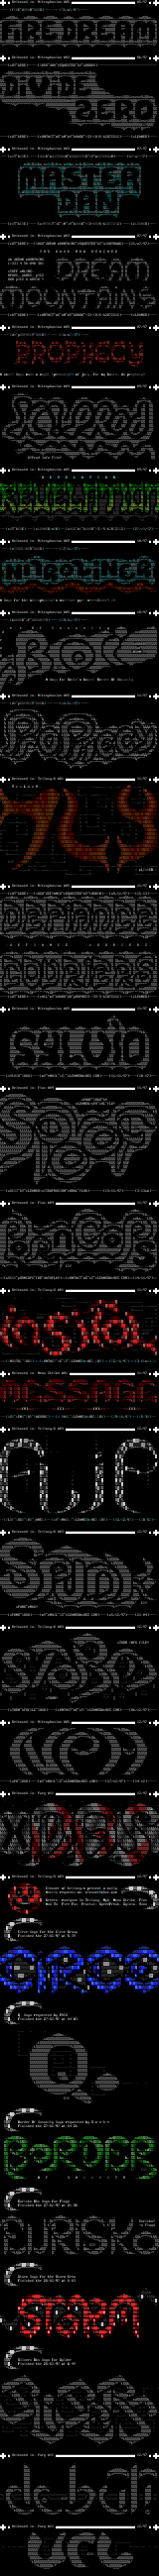 1997 Ascii Collection by Cleaner